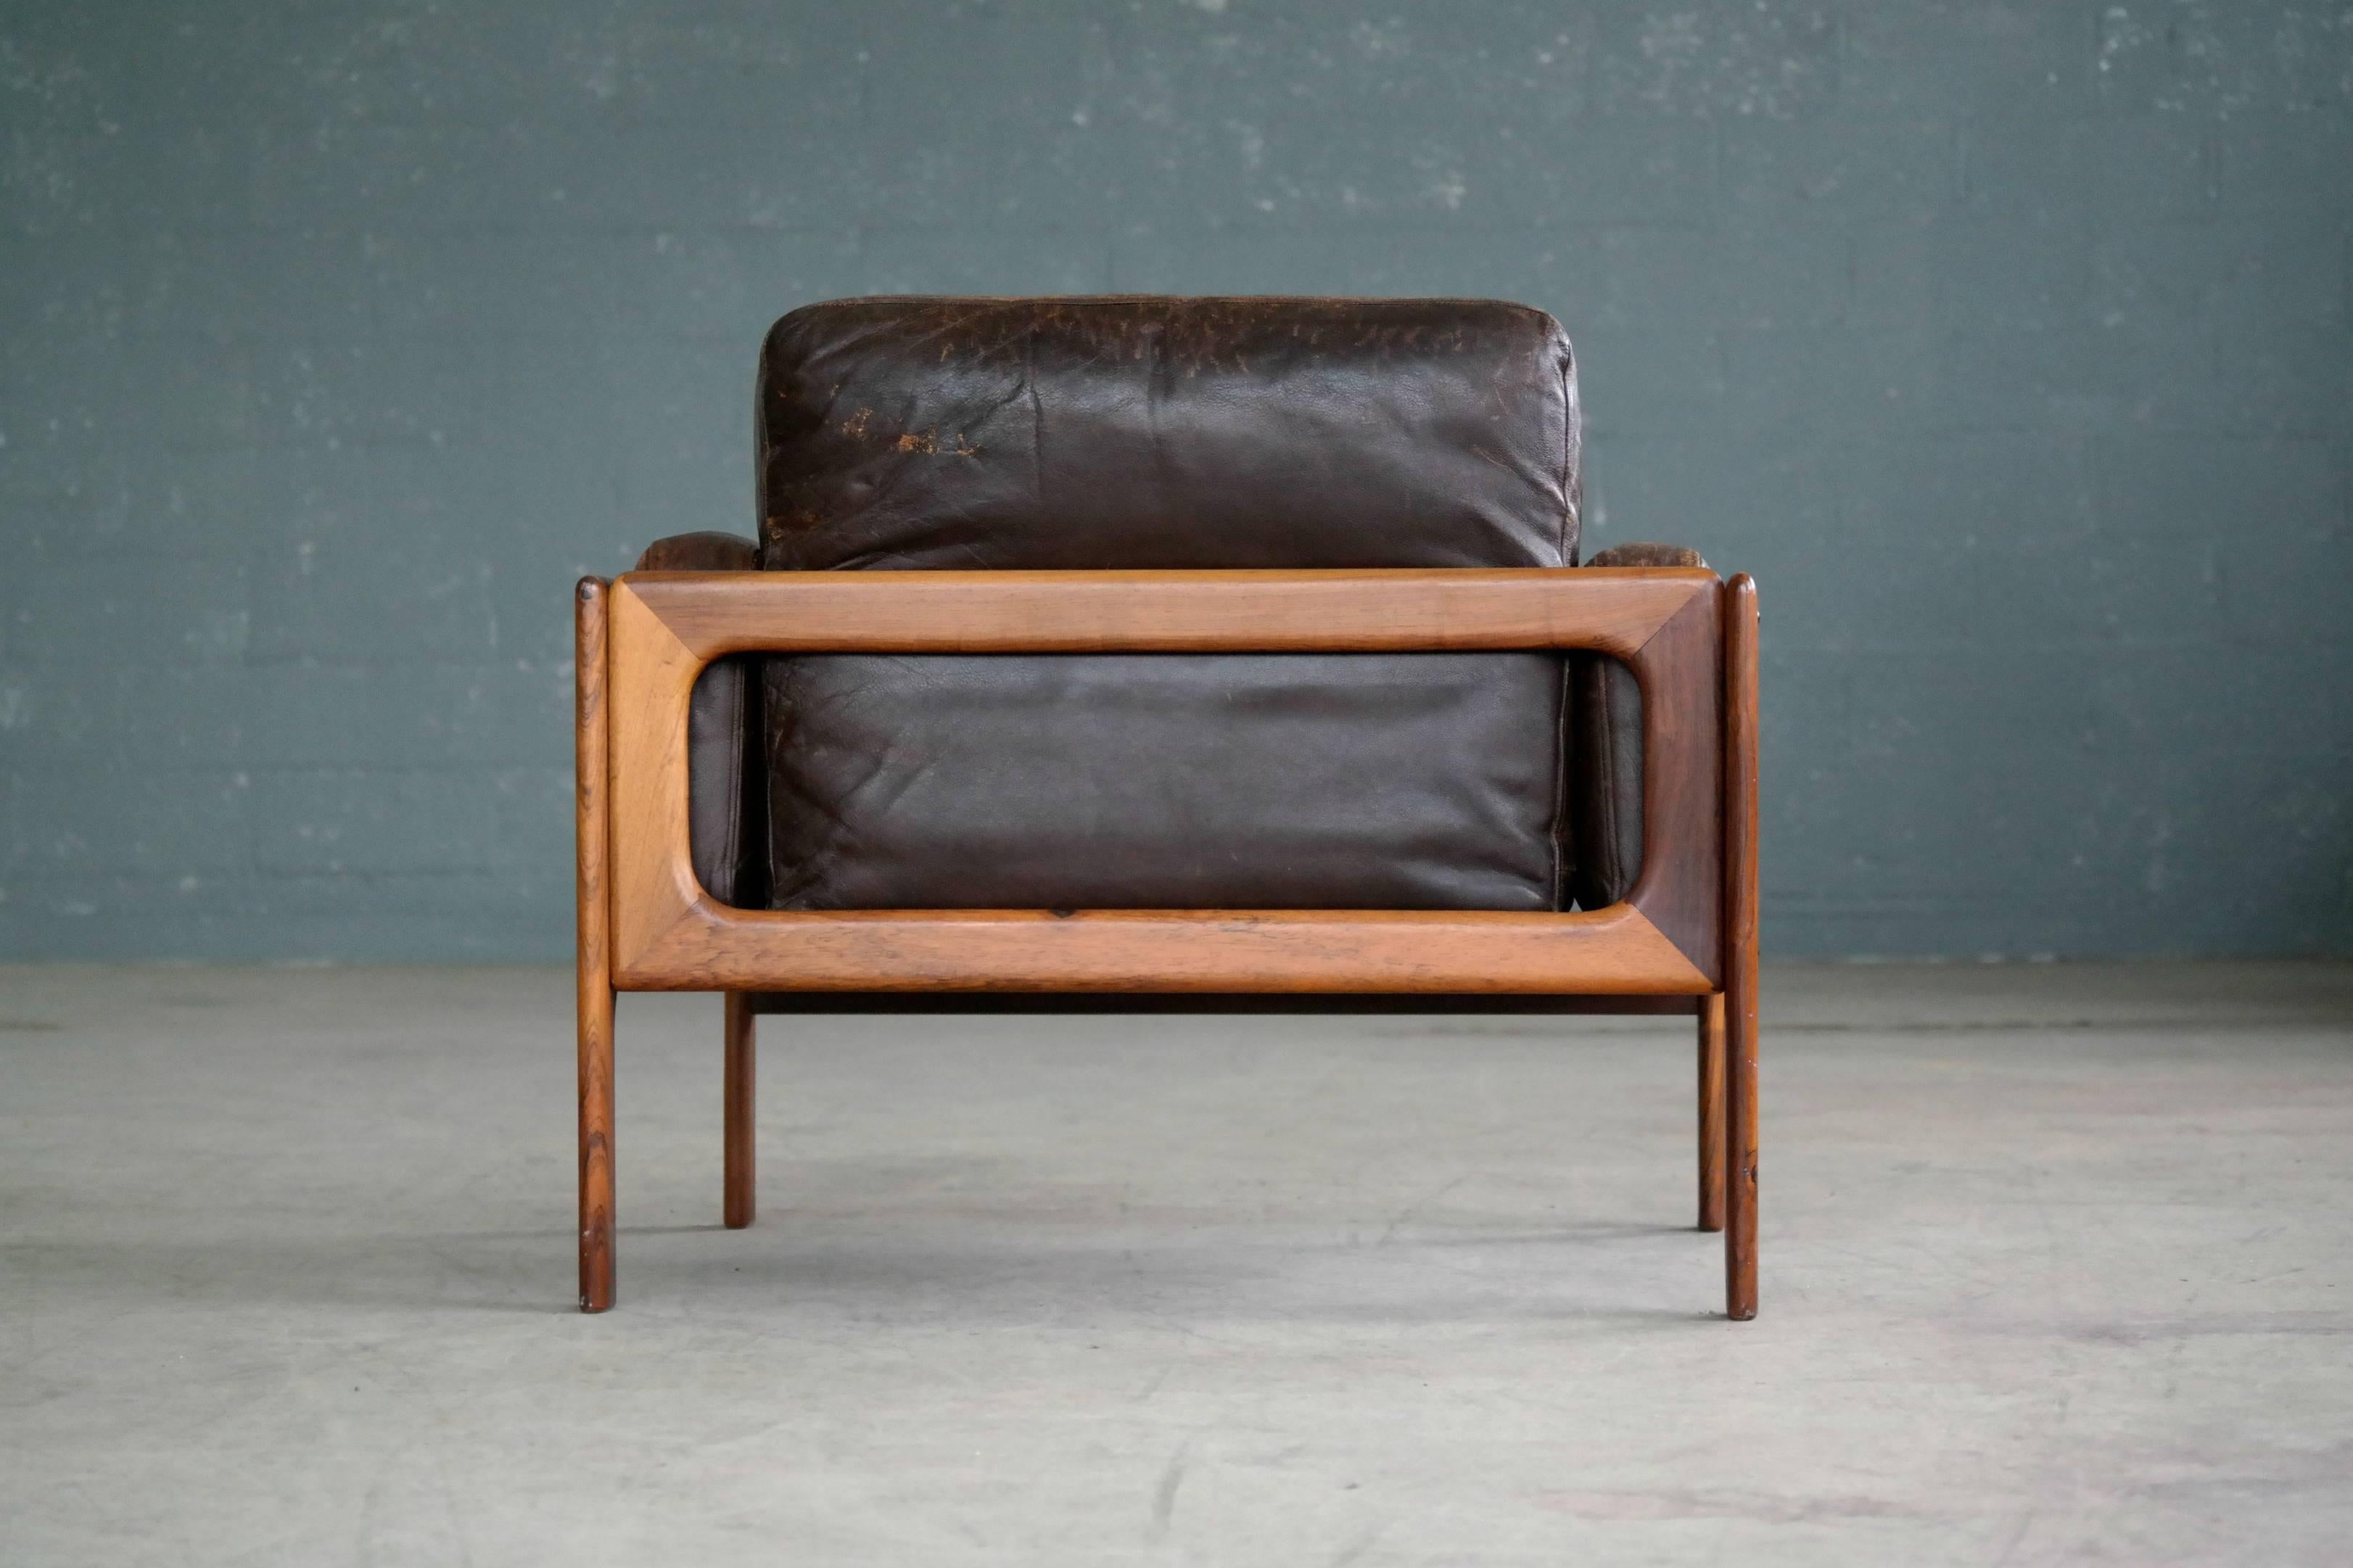 Mid-20th Century Arne Wahl Iversen Pair of Easy Chairs in Rosewood and Leather for Komfort Mobler